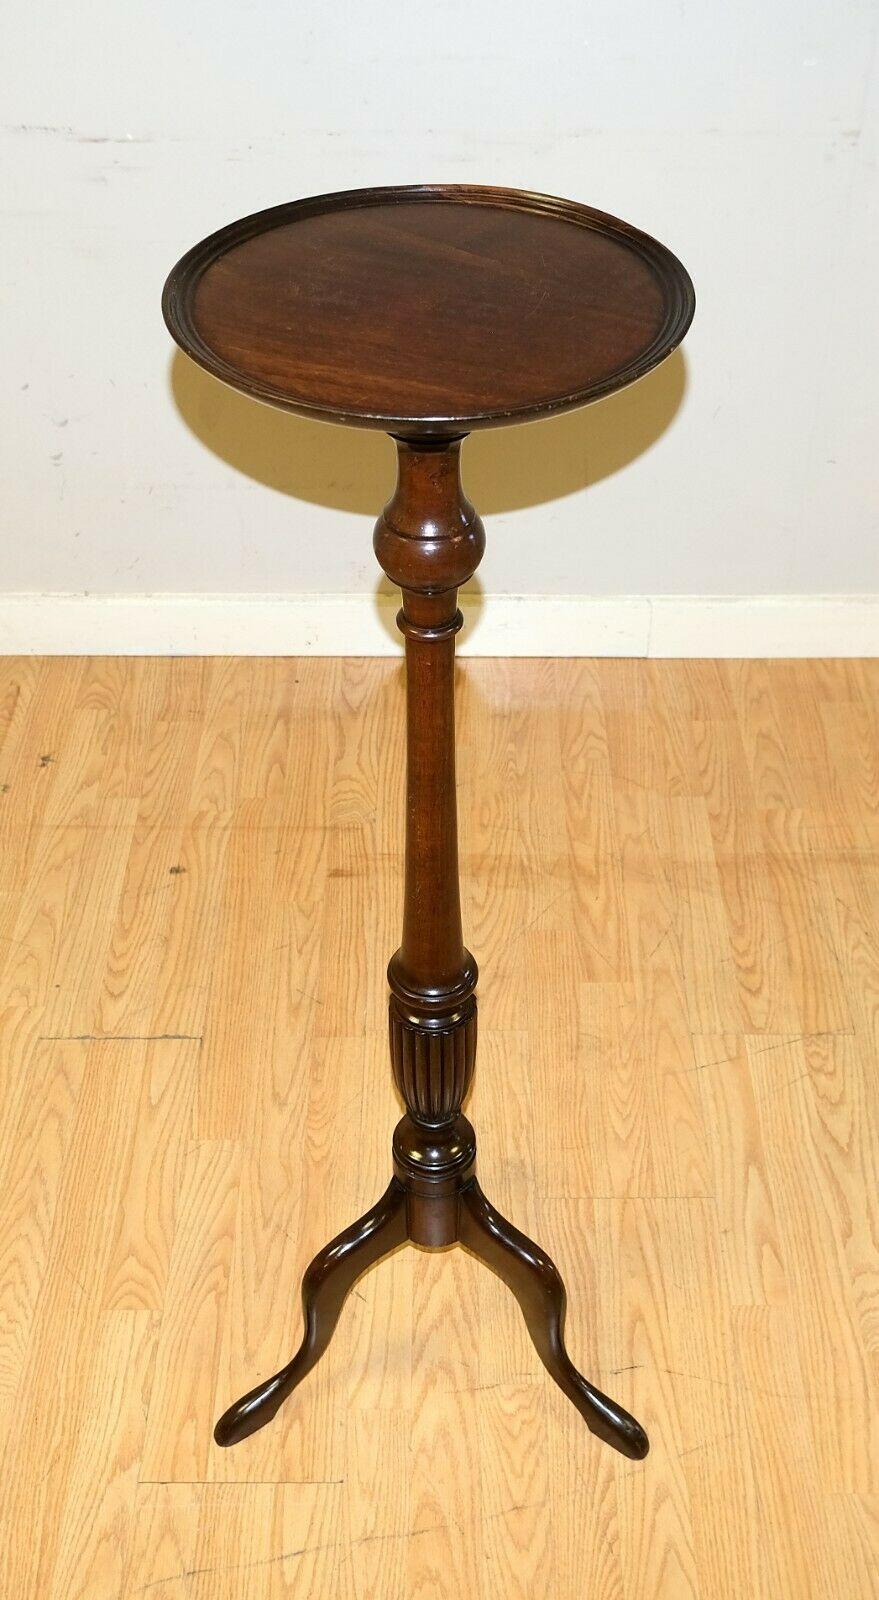 We are delighted to offer for sale this lovely Mahogany Torchere tripod brown side/ plant stand table.

This well looking and tall table is presented with a nice central column with delicate details, making it elegant for any room. The table is in